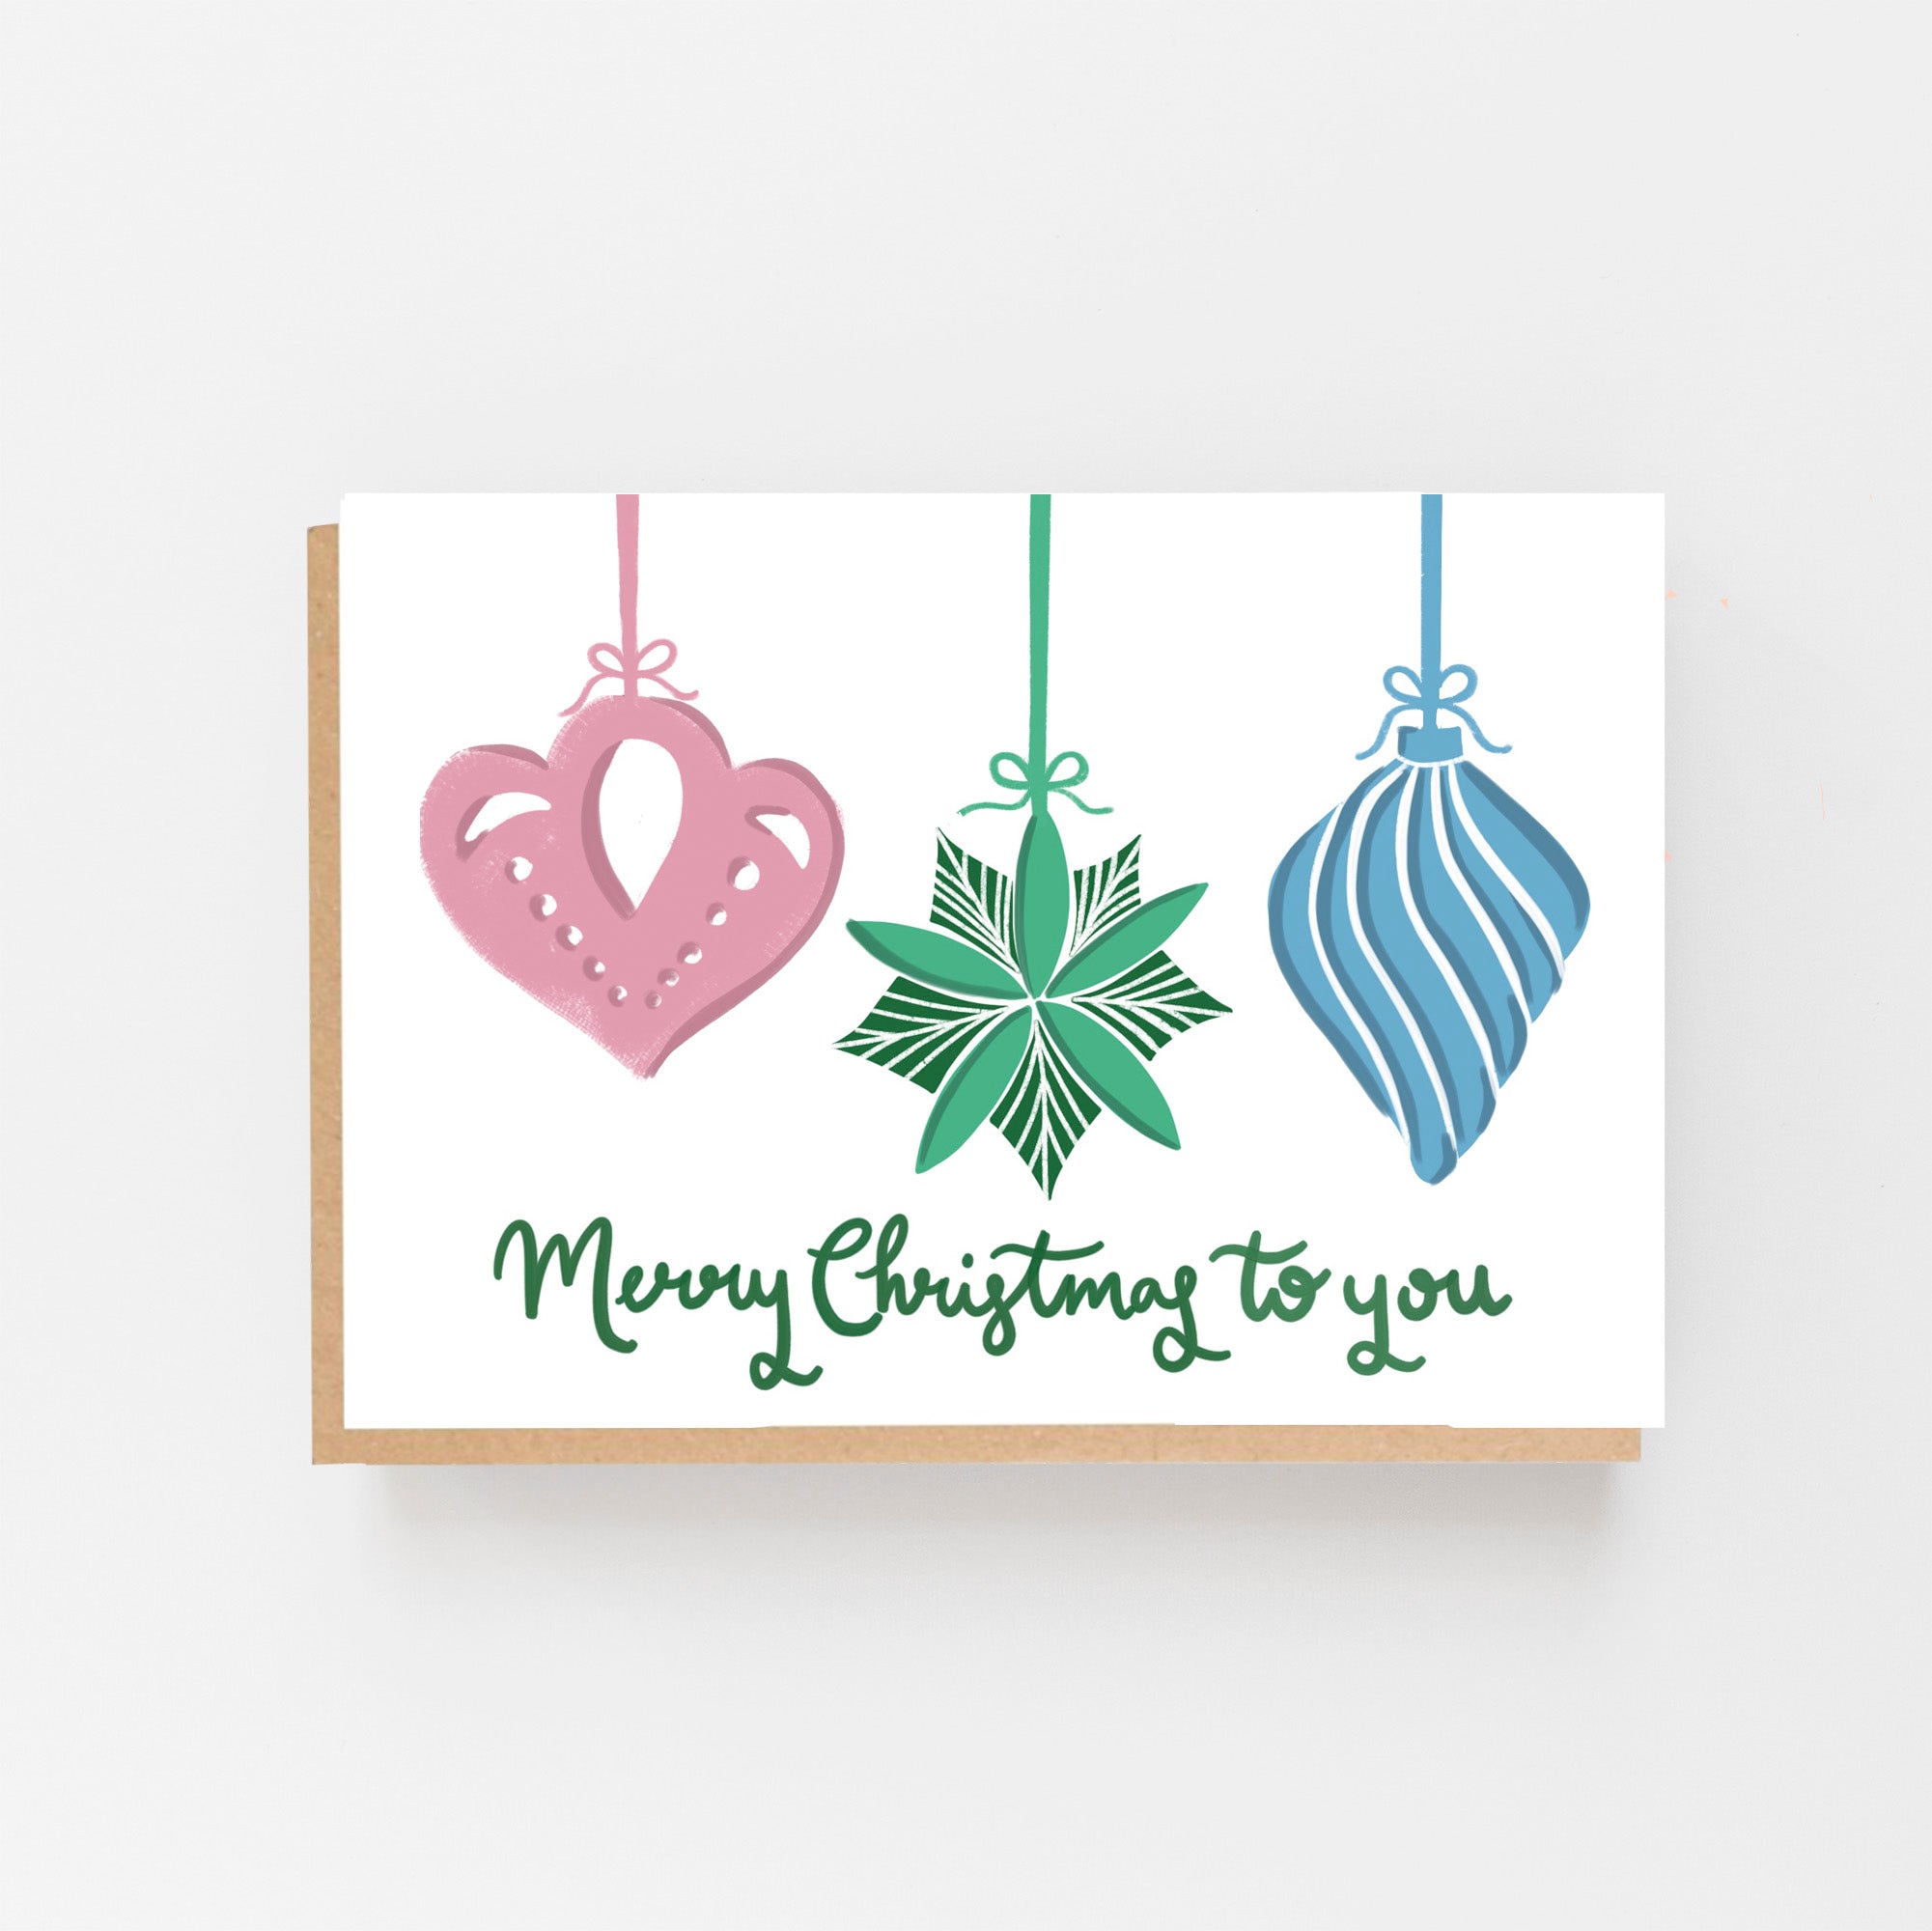 Merry Christmas to you baubles card